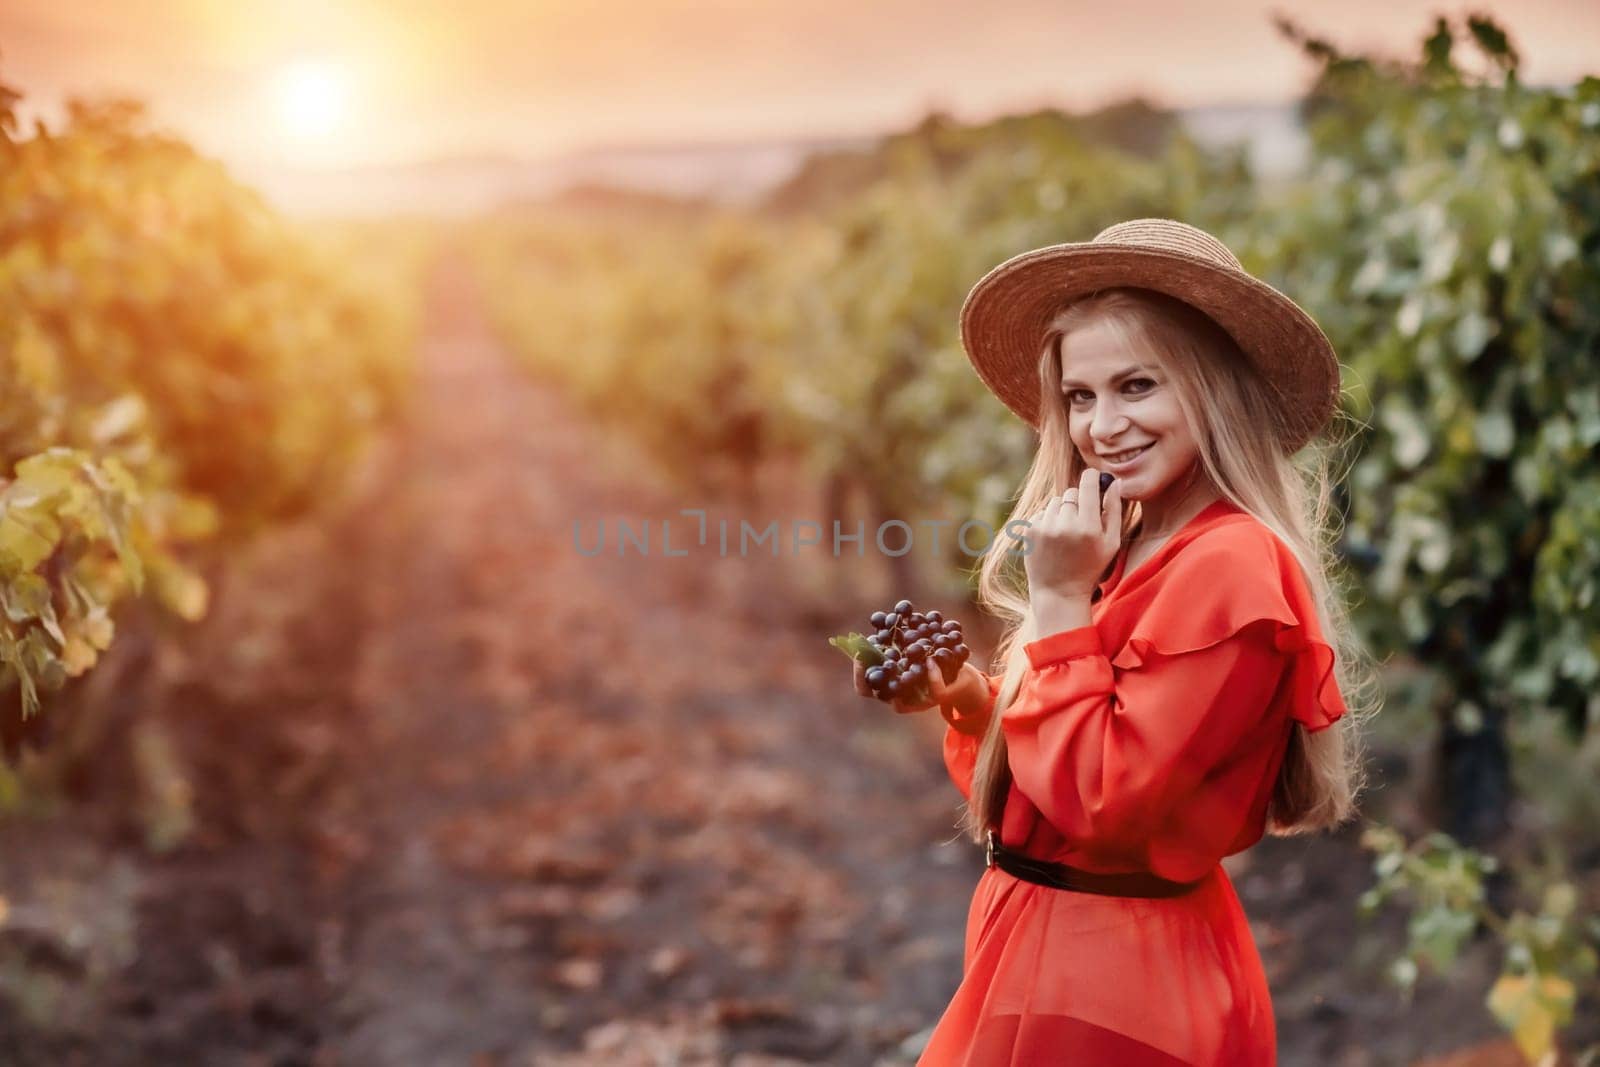 portrait of a happy woman in the summer vineyards at sunset. woman in a hat and smiling